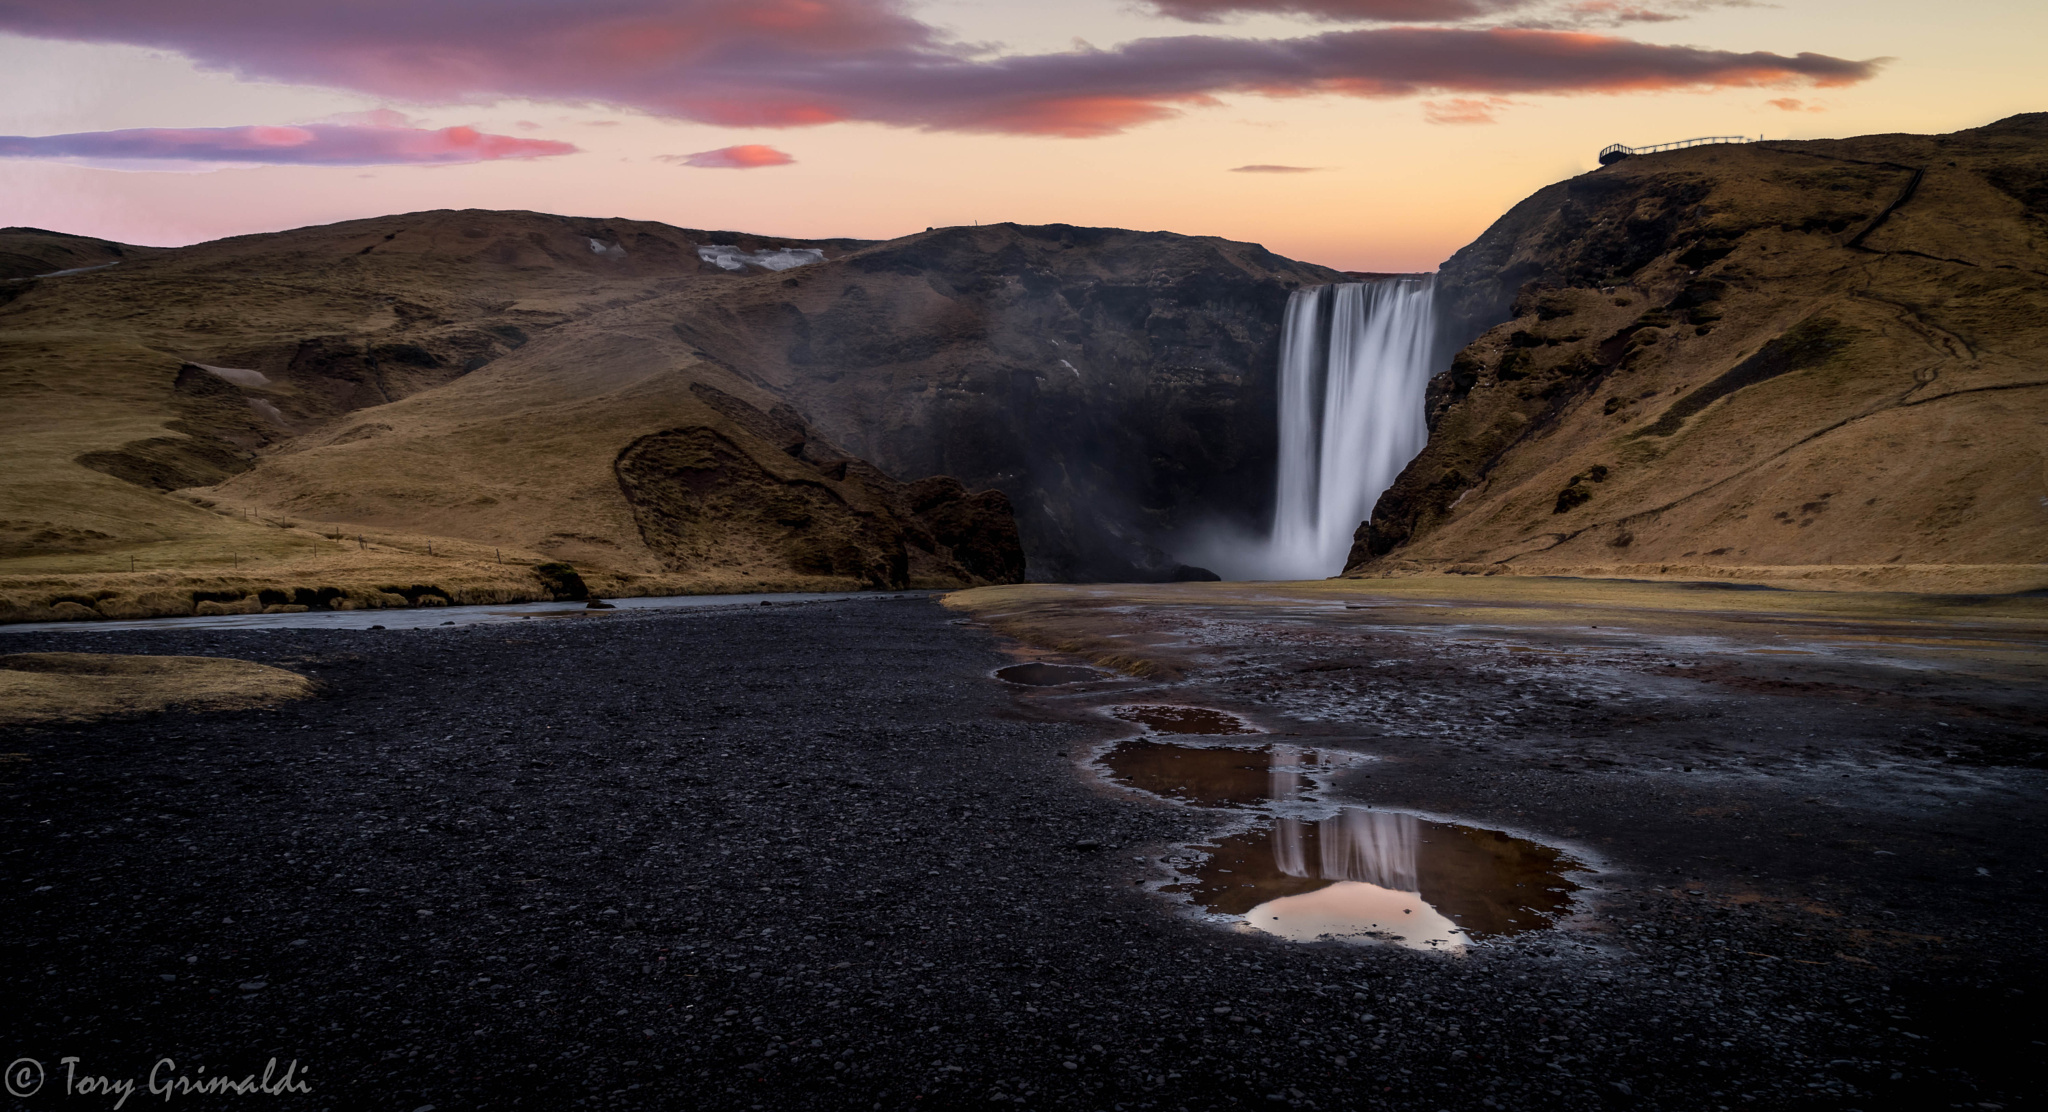 50 Photos of Our Crazy Beautiful Planet to Help You Celebrate Earth Day